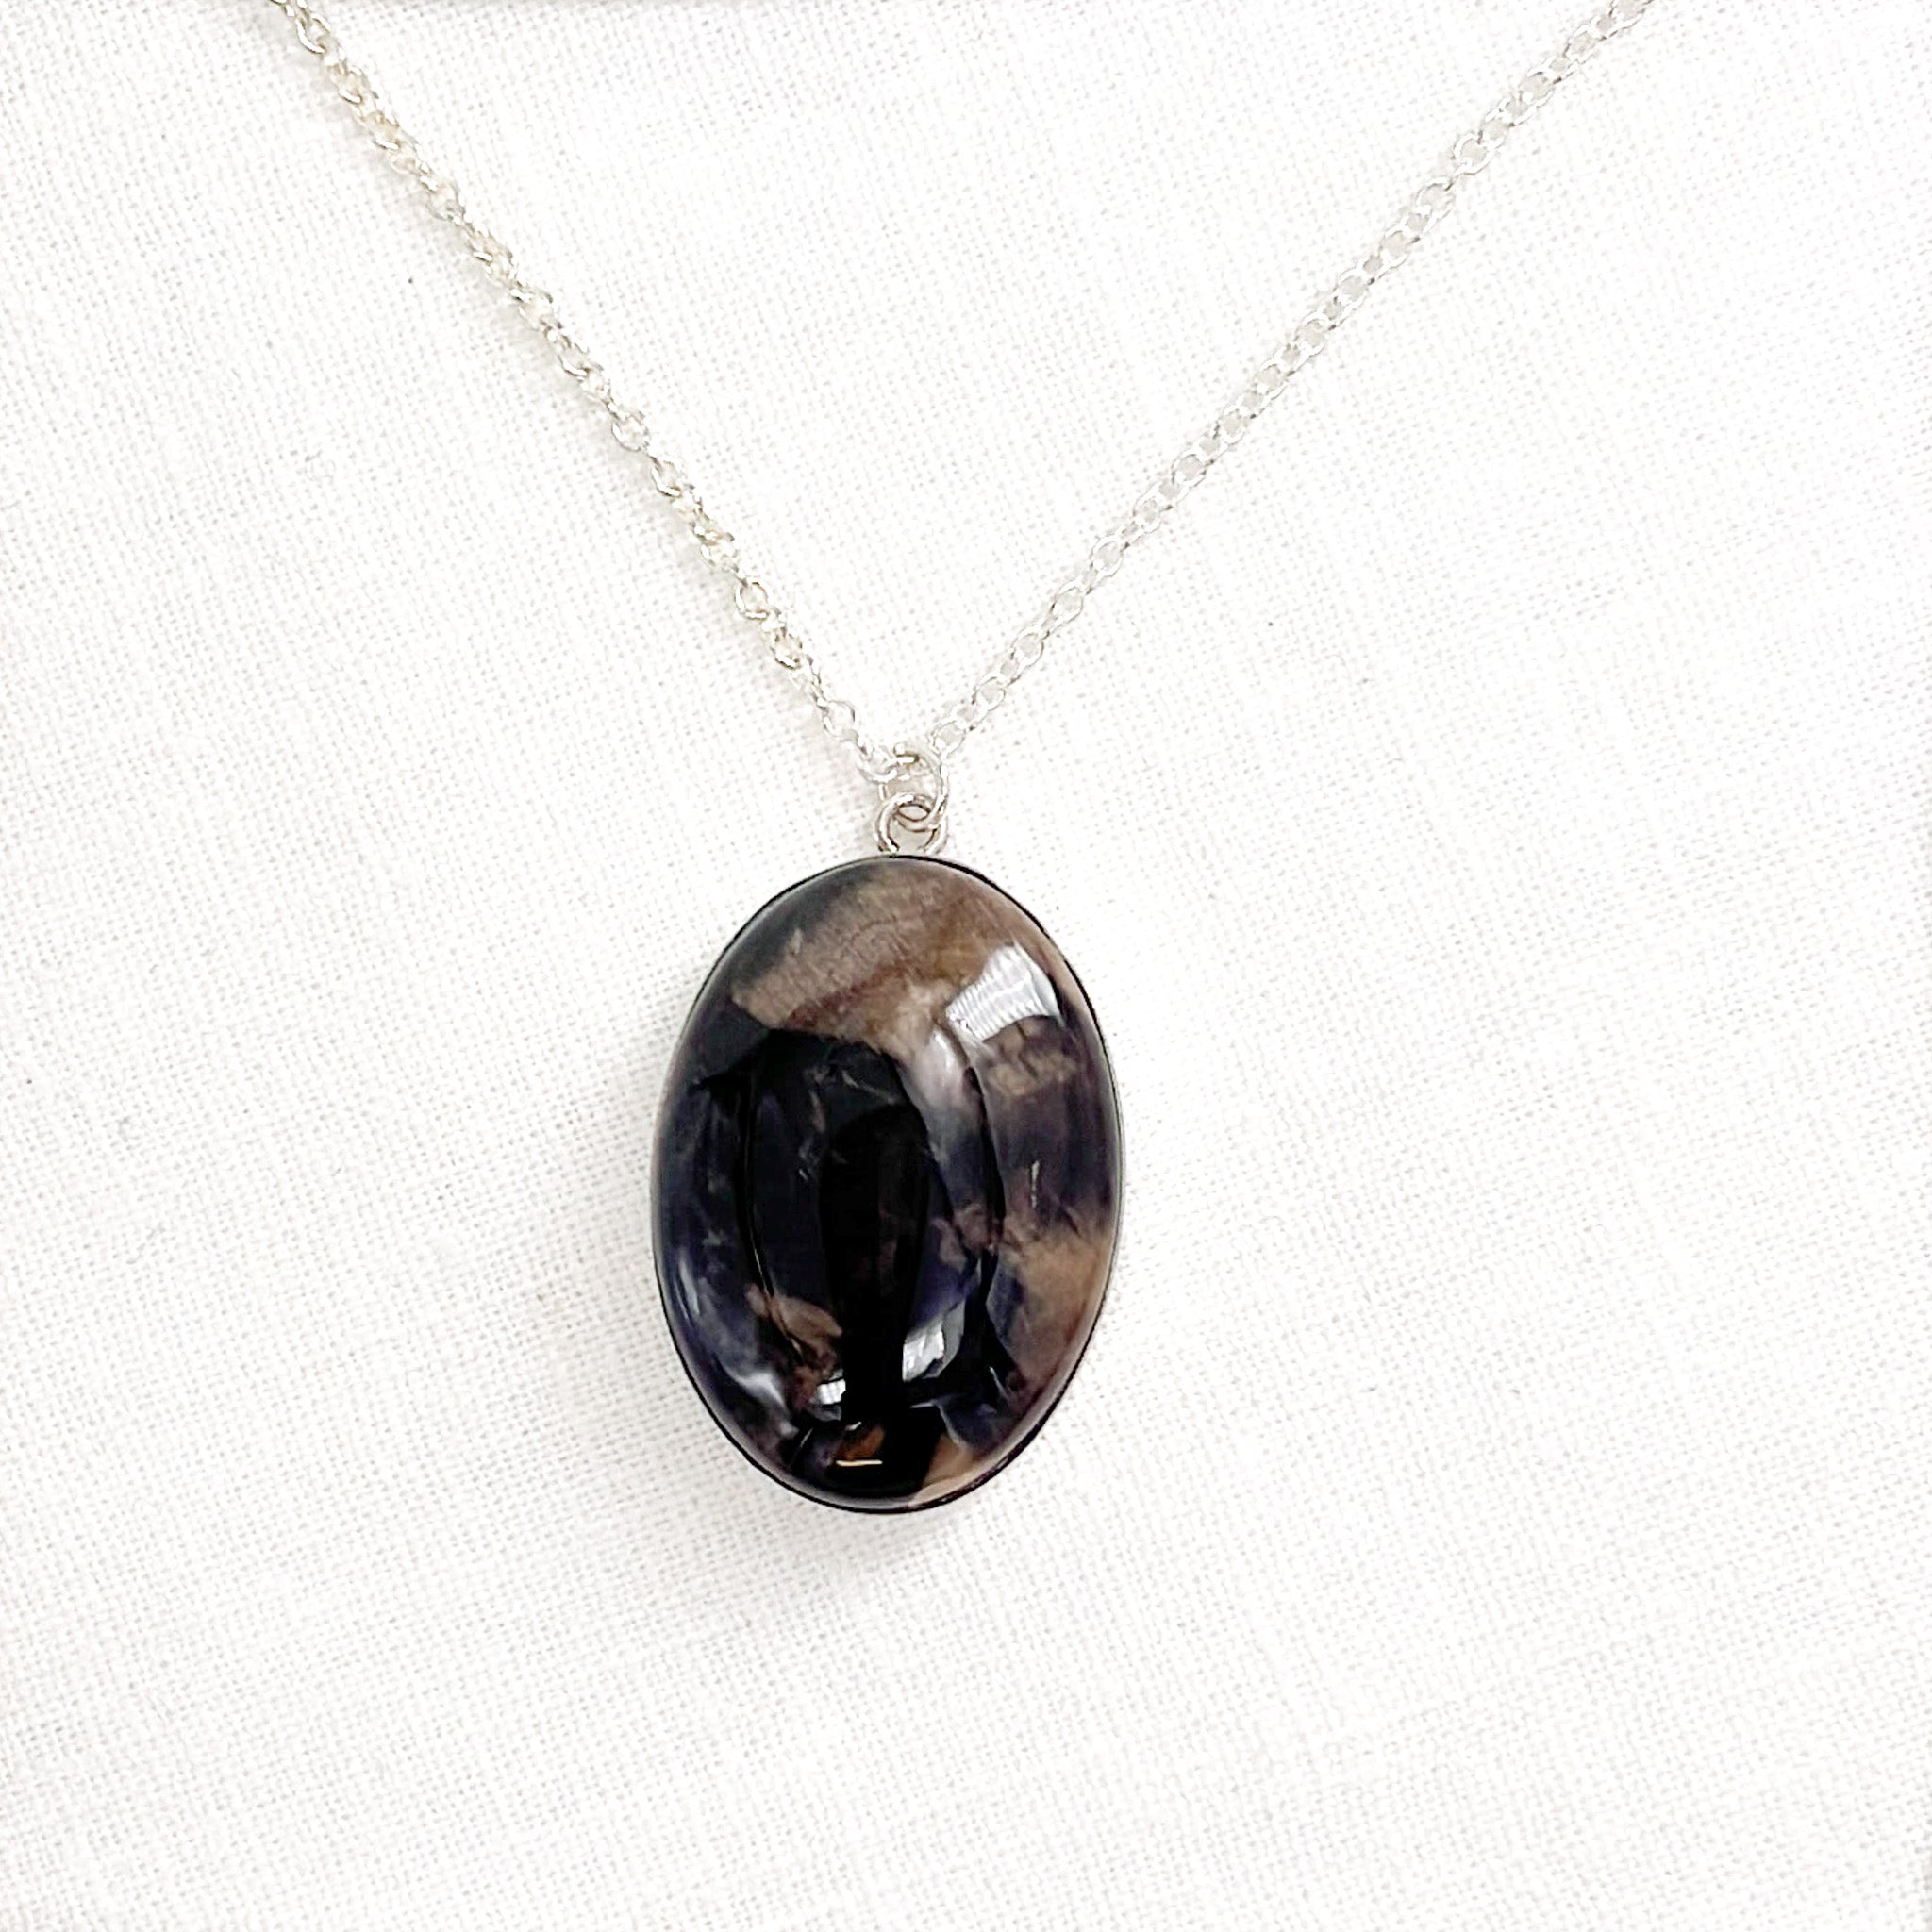 Medium Lodestar Necklace with 25mm x 18mm mottled Black Petrified Wood from Colorado